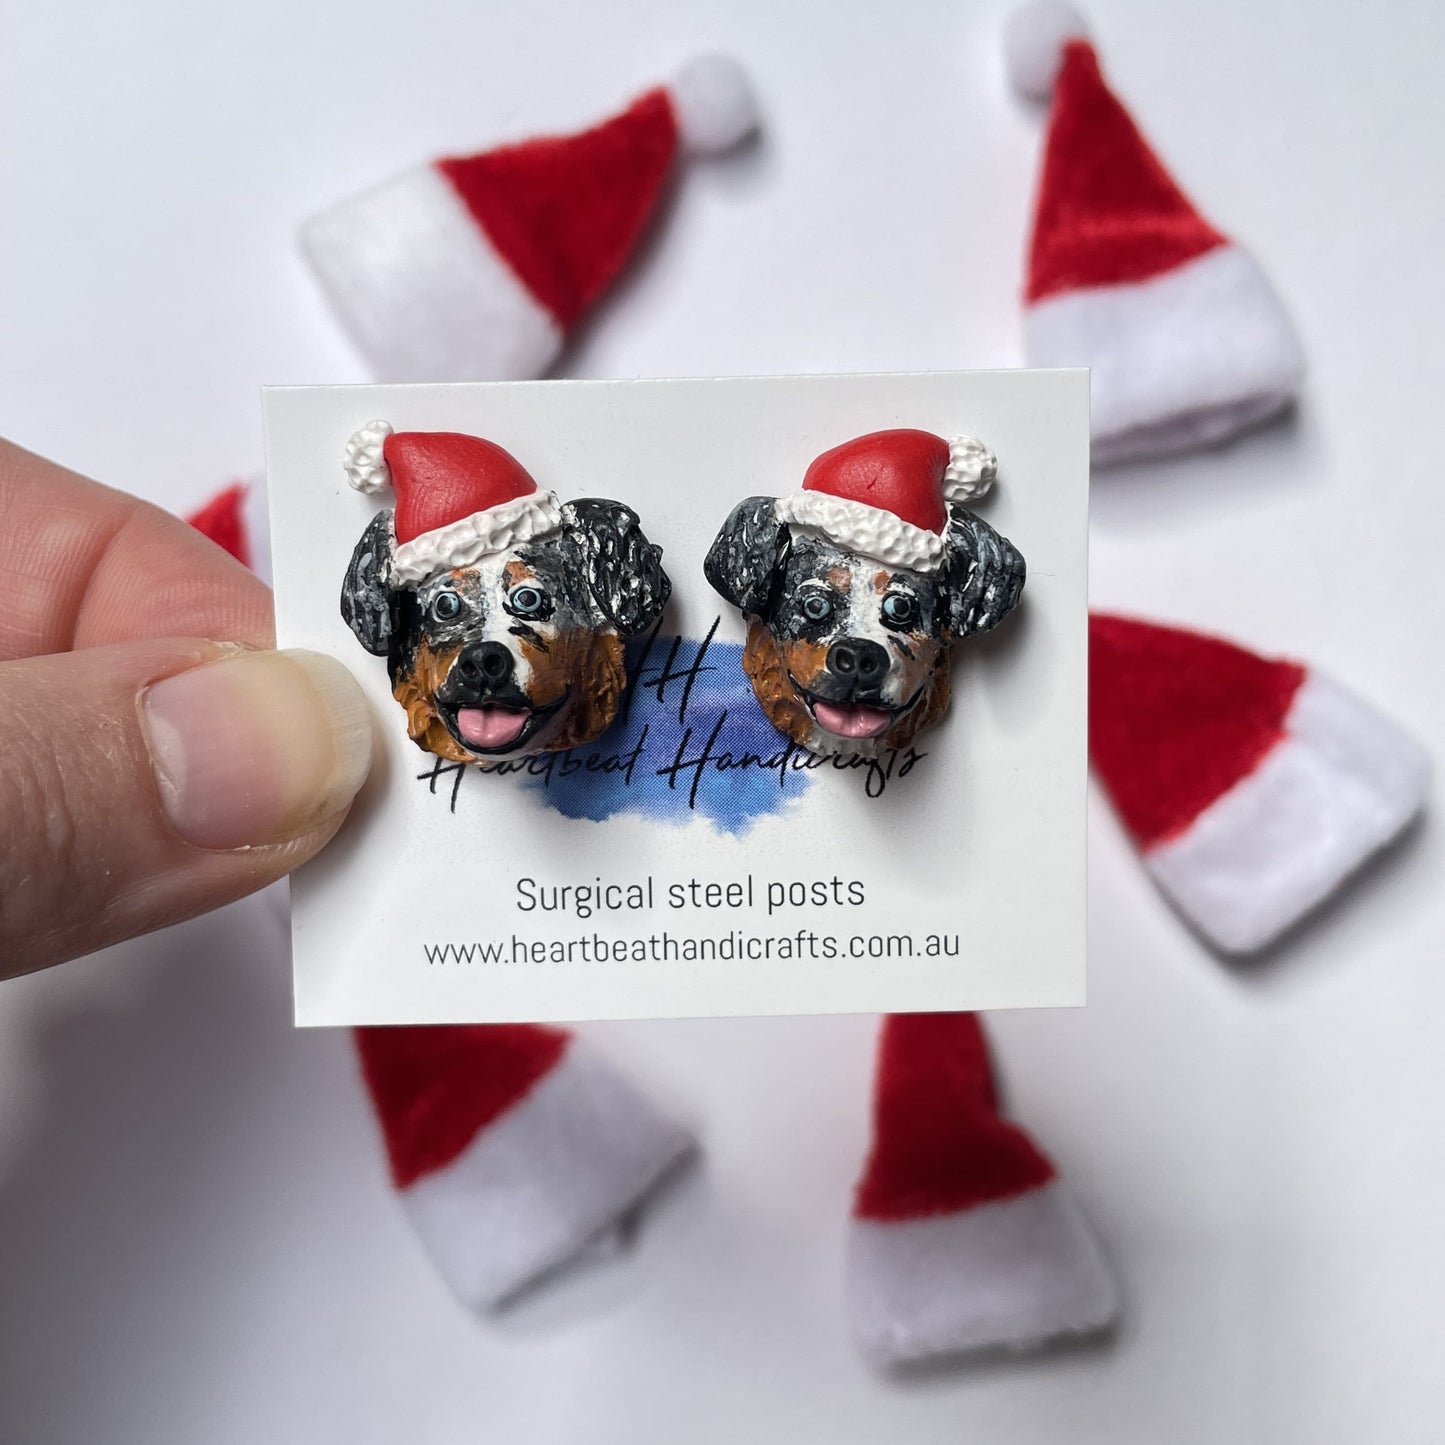 Handmade earrings of a Australian Shepherd dog wearing santa hats, made from polymer clay held over a Christmas hat background.